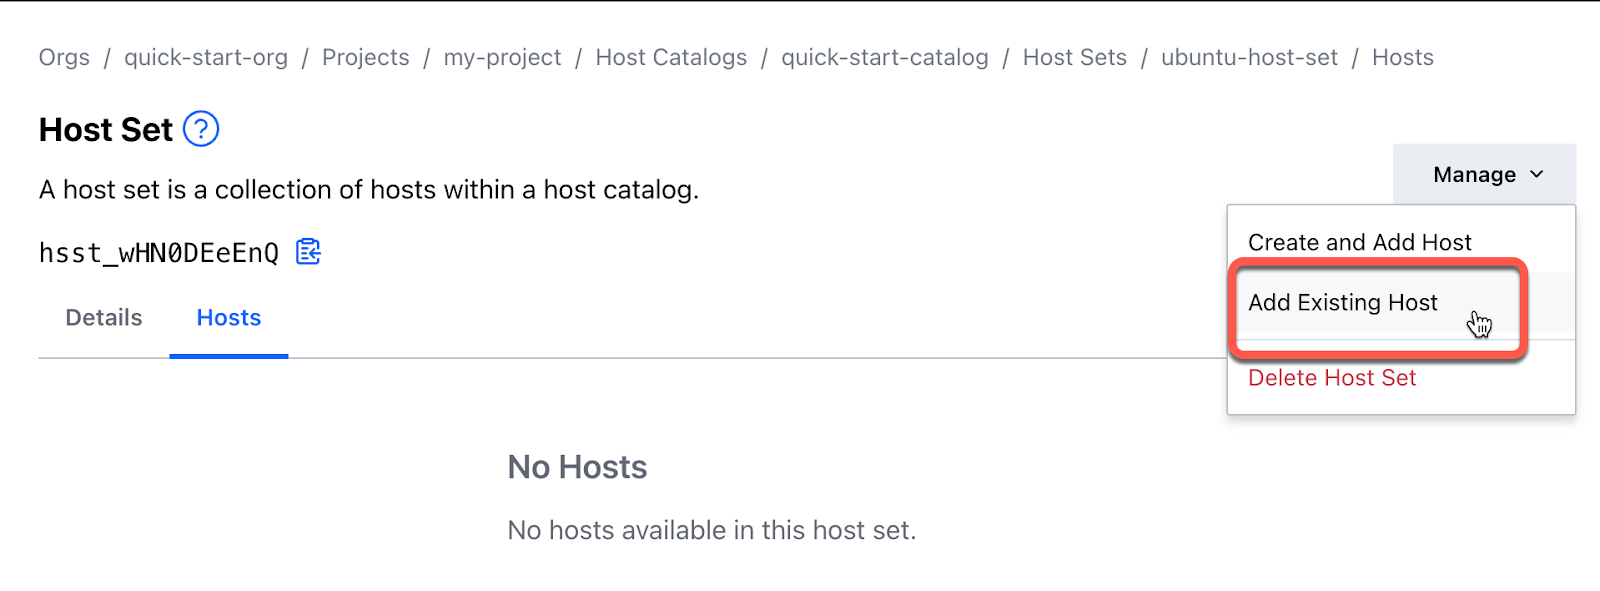 Add existing host